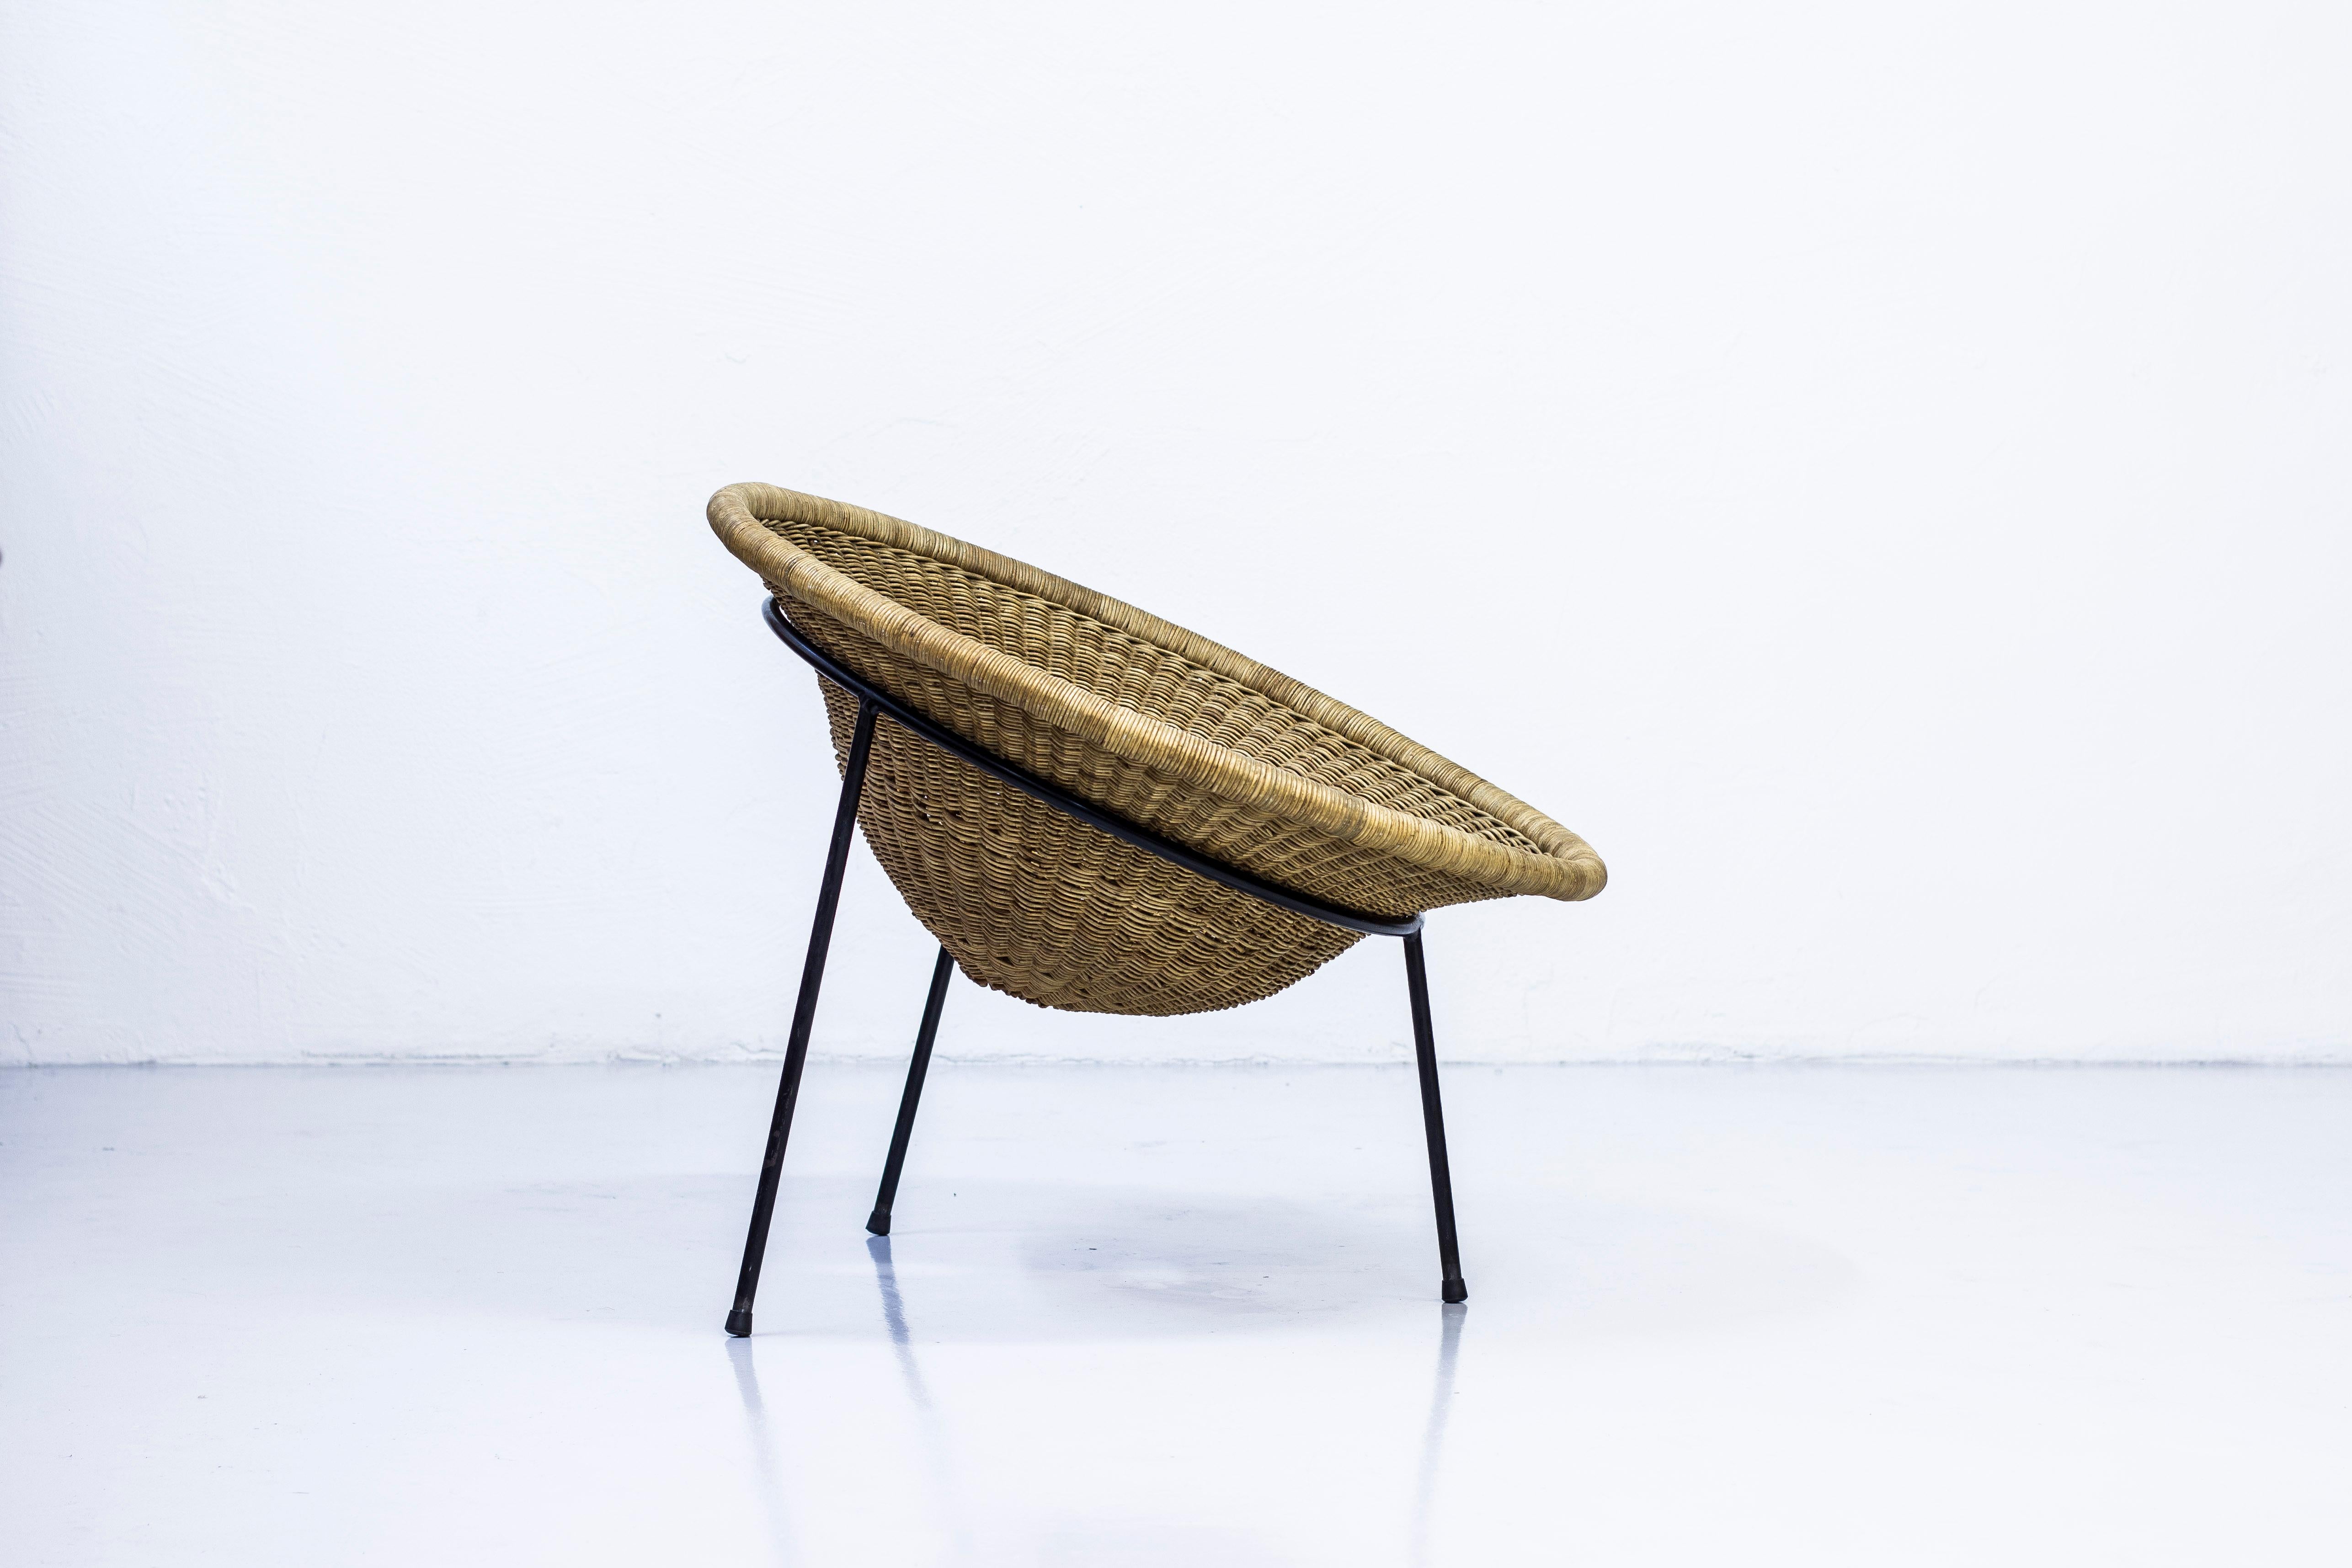 Easy chair attributed to Sven Staaf. Produced by Staaf & Almgren, circa 1954 in Sweden. Made from handwoven wicker on a black lacquered metal frame. Very good vintage condition with few signs of wear and light age related patina.

The chair is